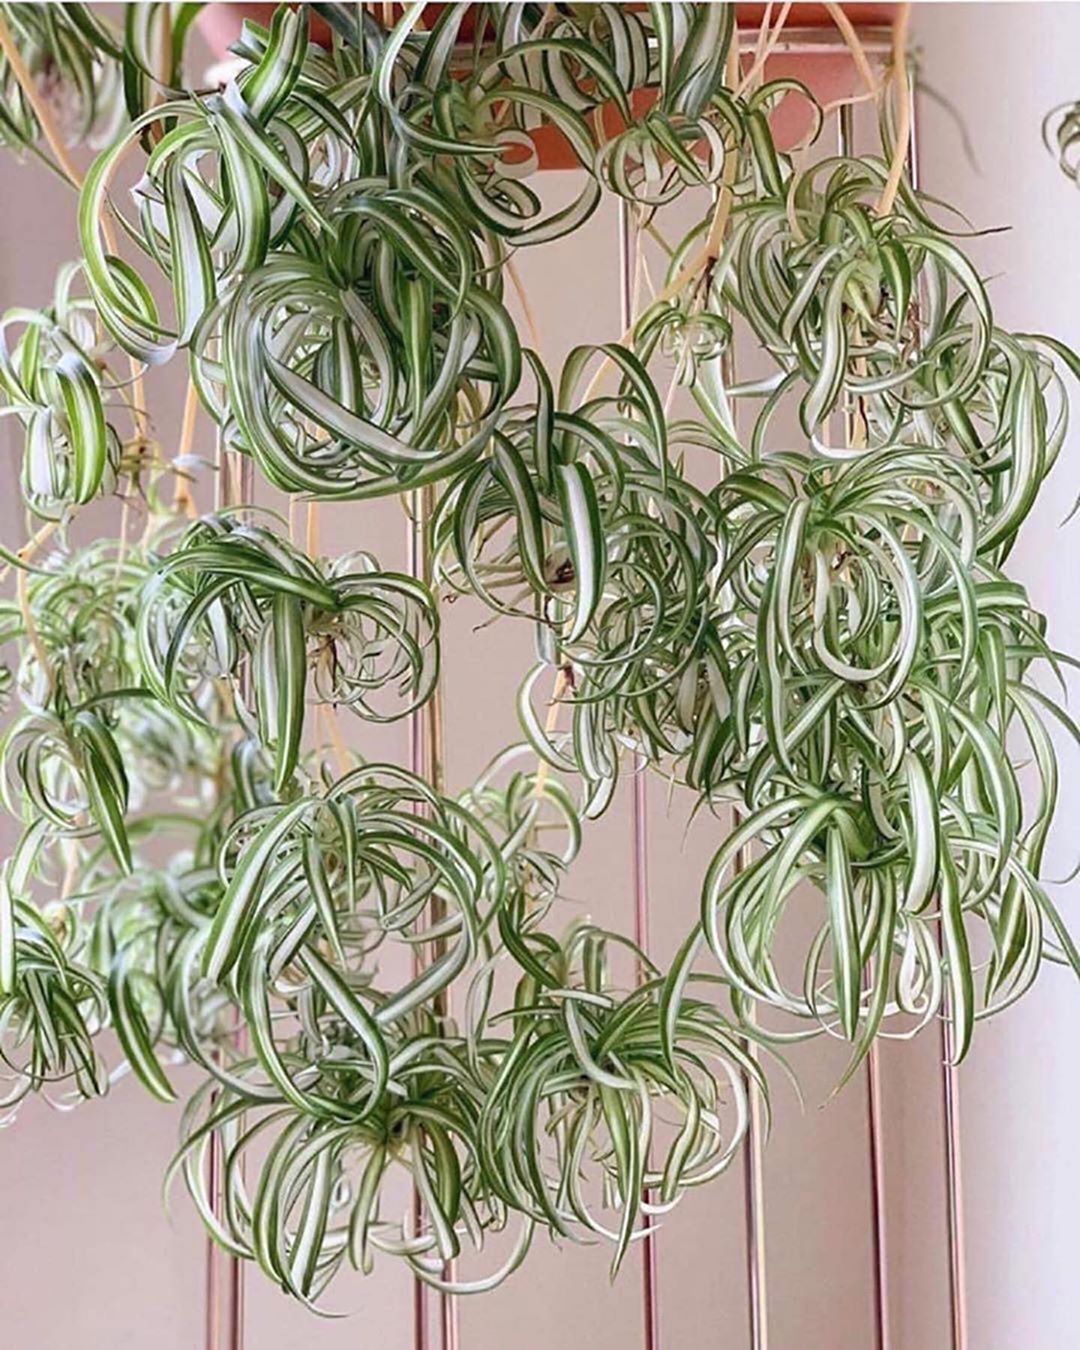 The spider plant grows fast and will give you lots of kids